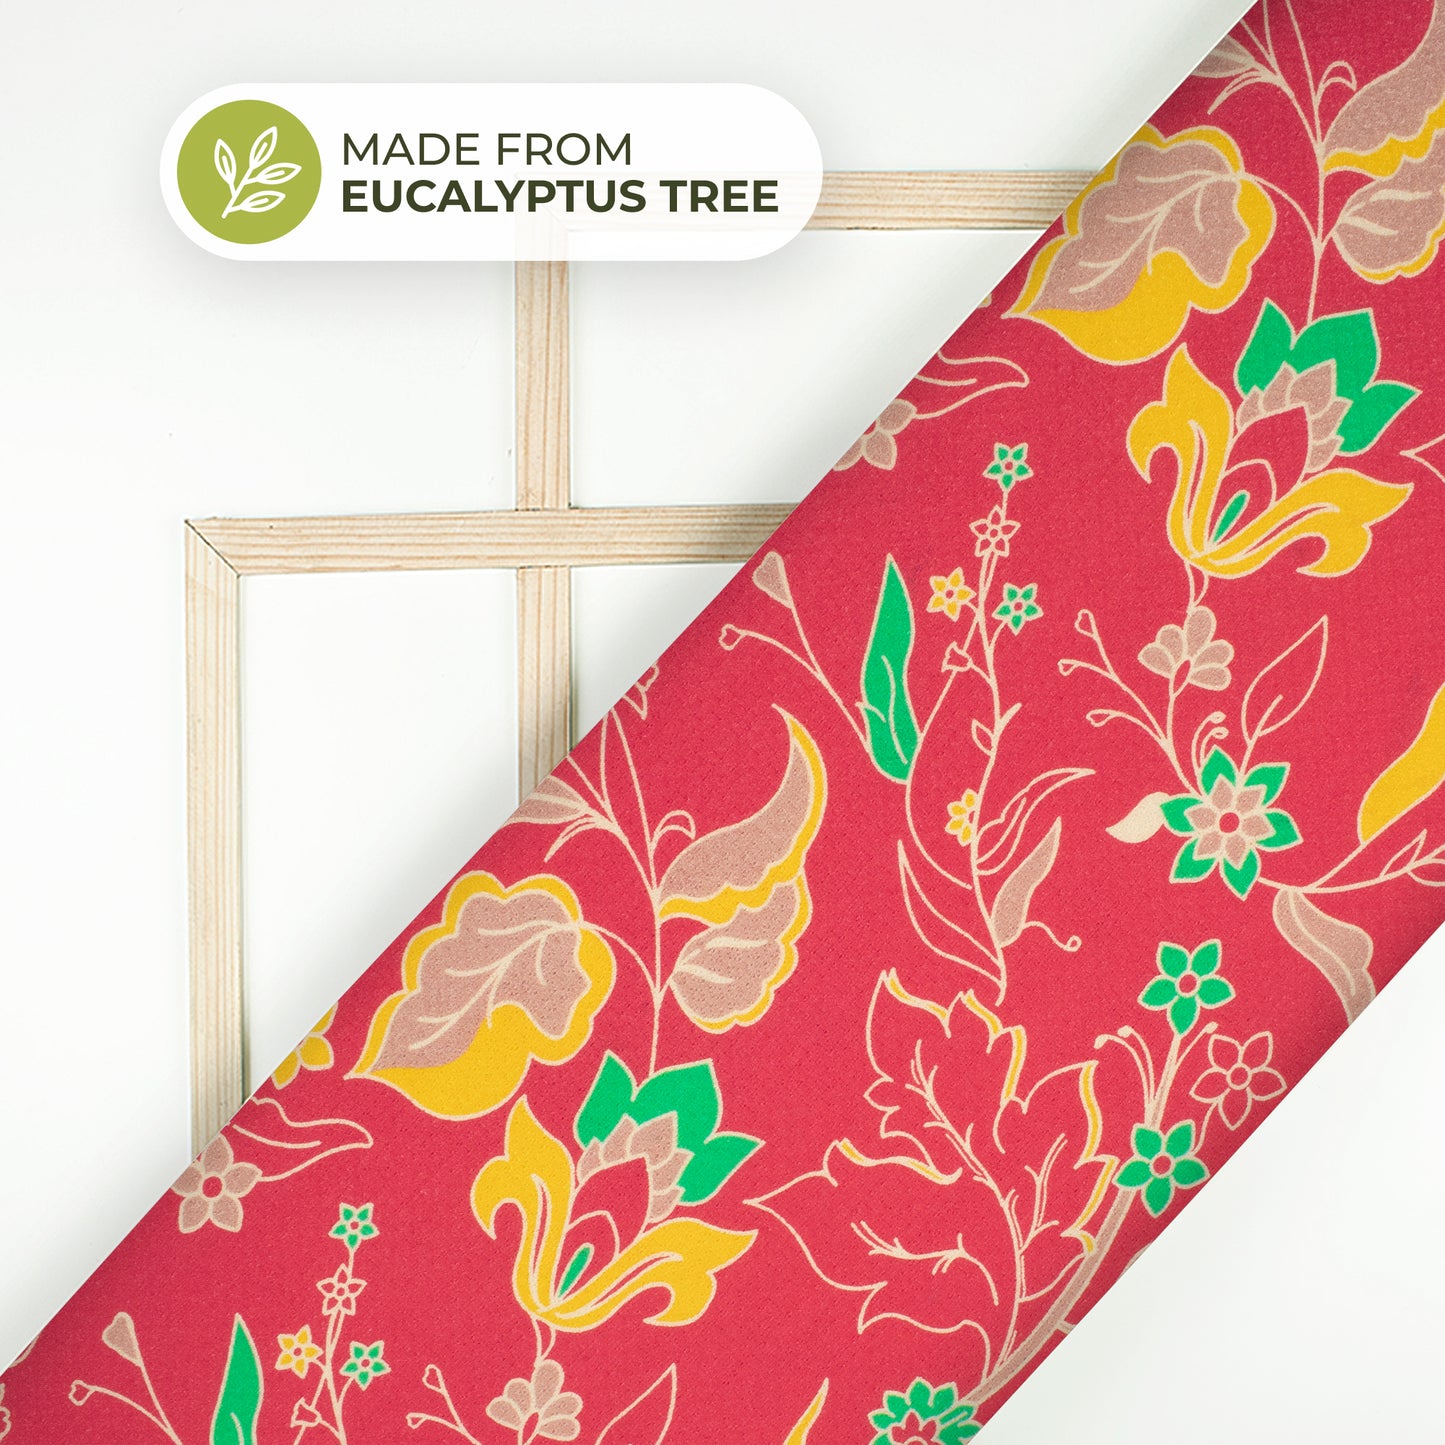 Crimson Red Floral Printed Sustainable Eucalyptus Fabric